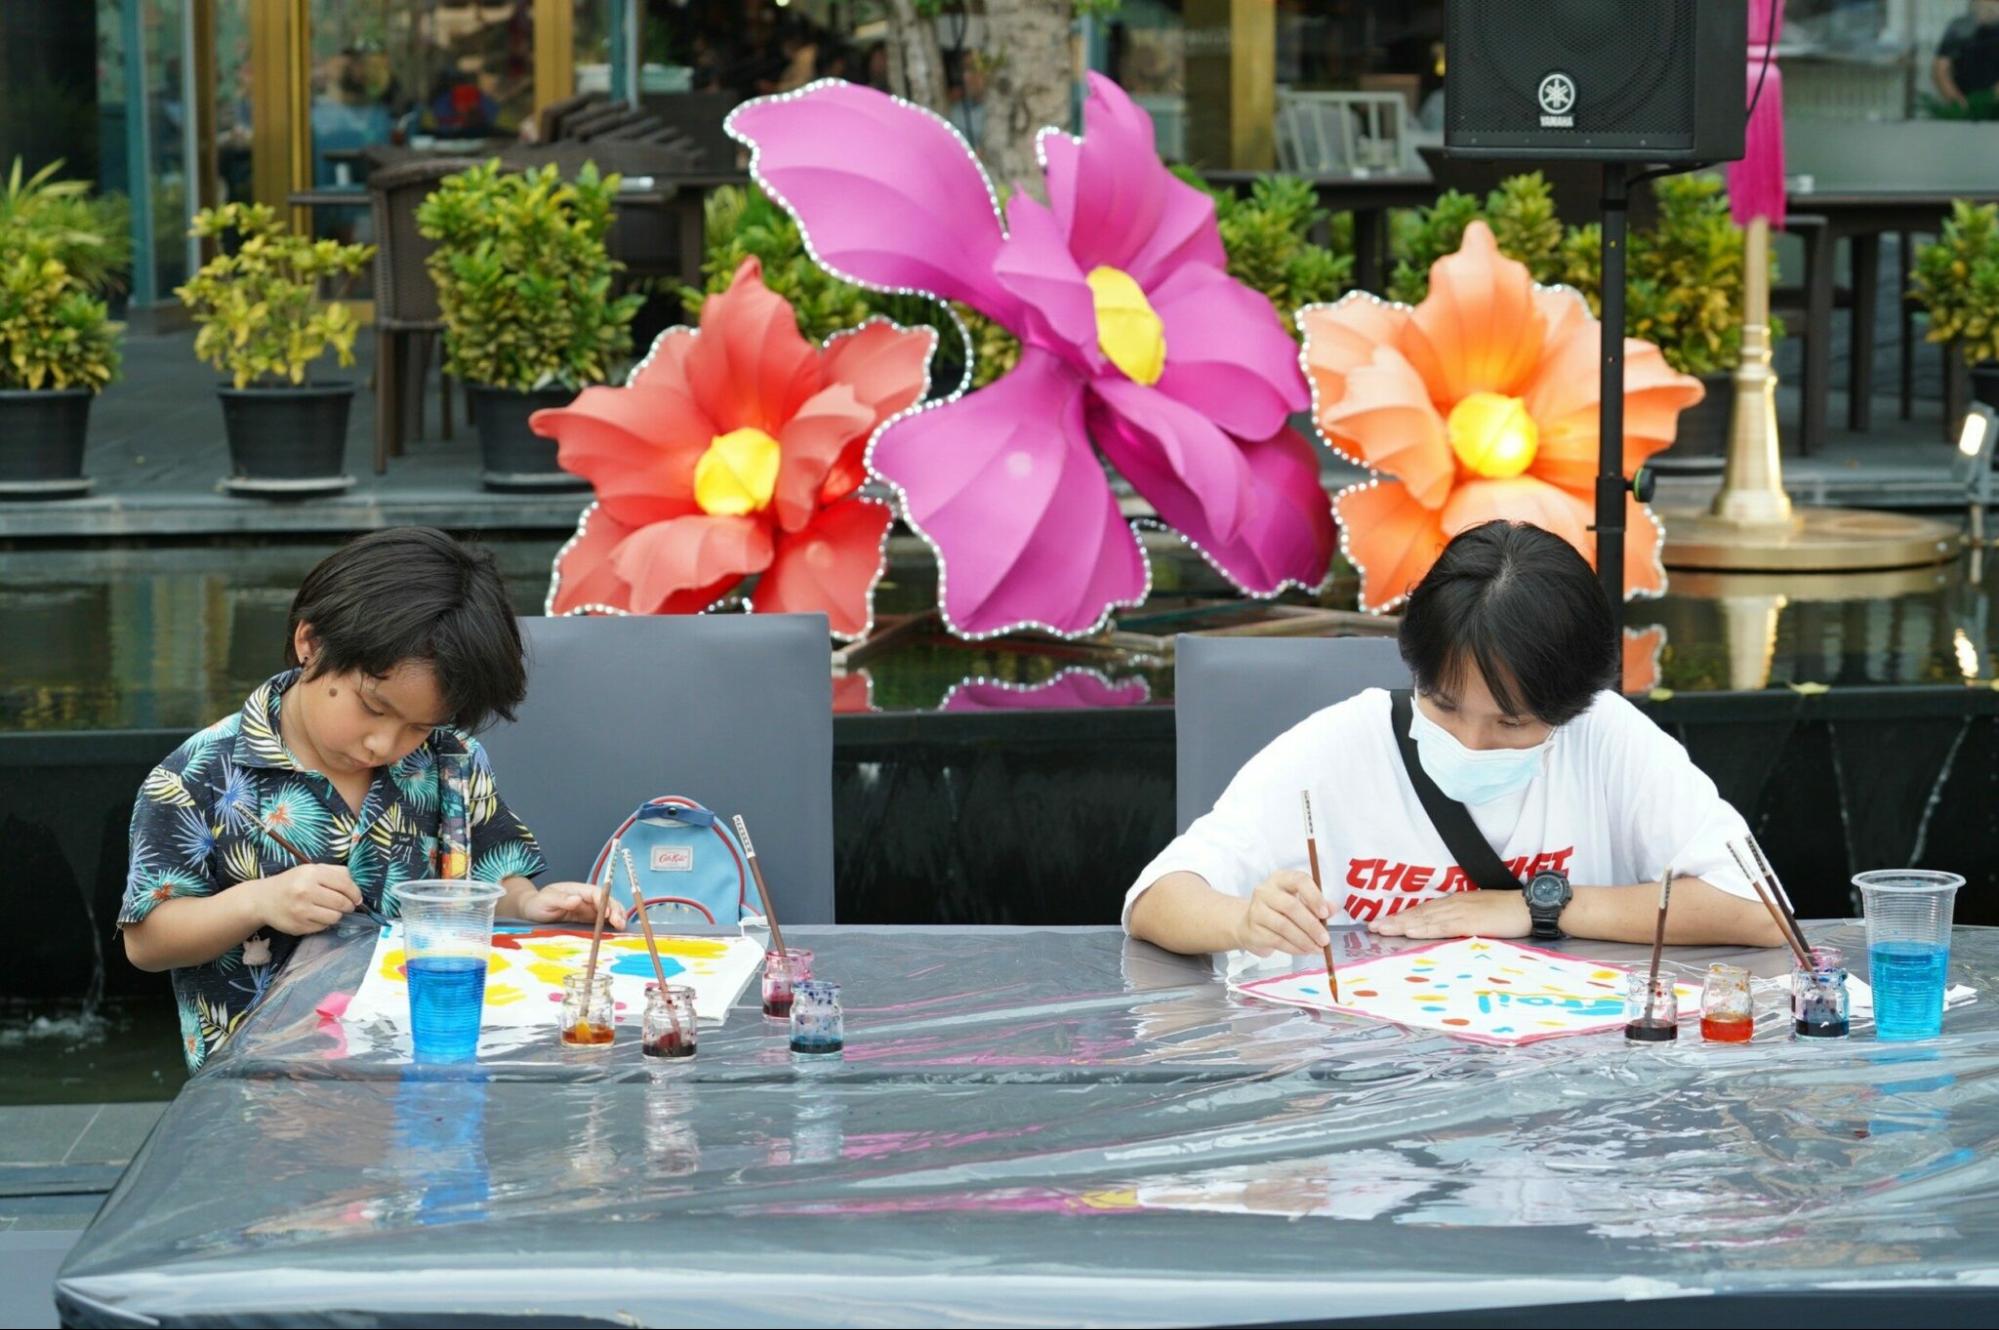 ICONSIAM’s Summer Kite Playground: Make & Fly Your Kites Until 18th April